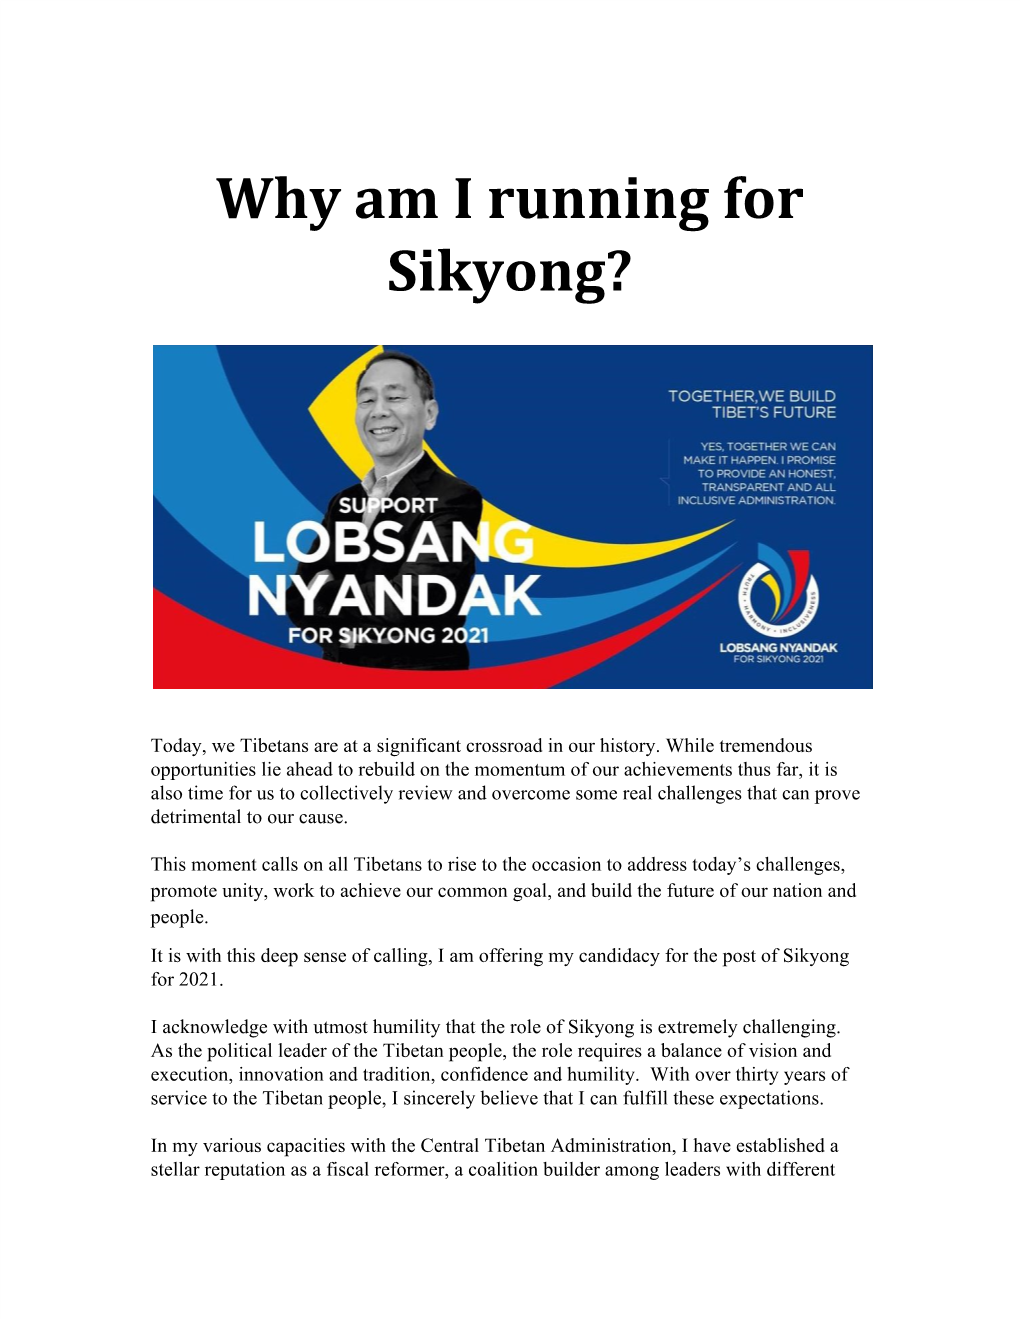 Why Am I Running for Sikyong?